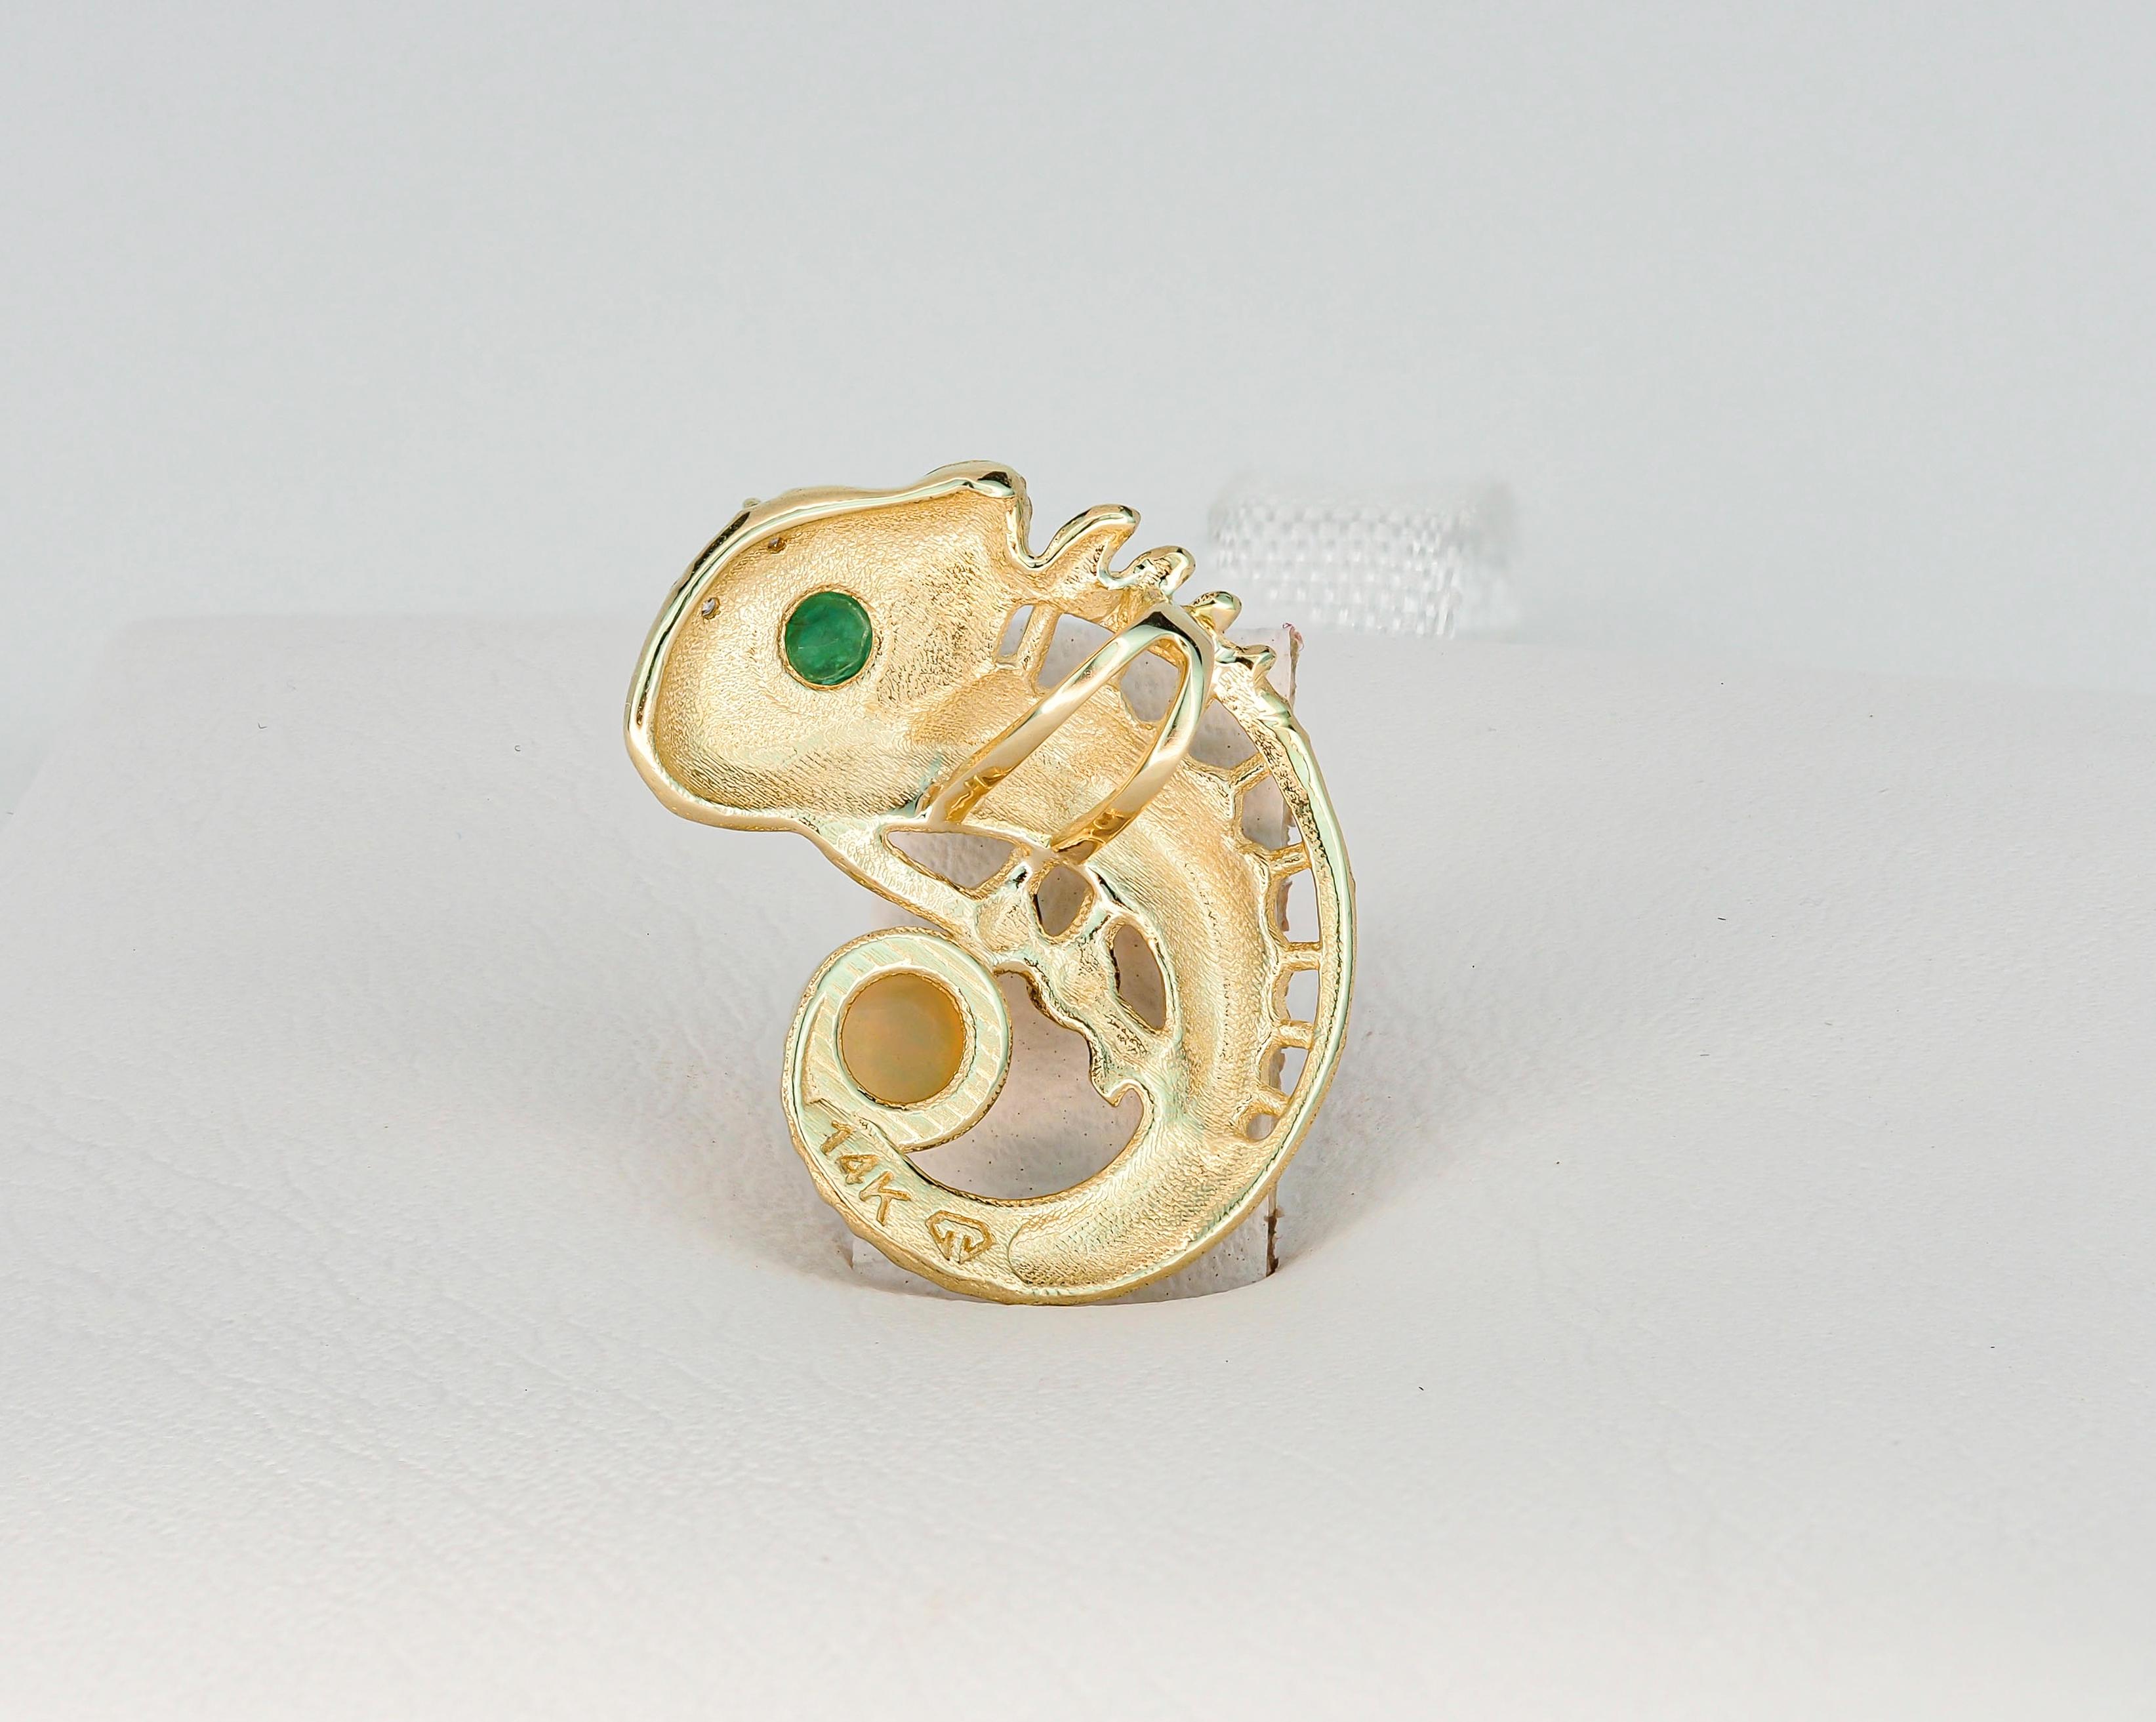 14k Gold Pendant with Opal, Emerald and Diamonds, Chameleon Pendant! For Sale 1